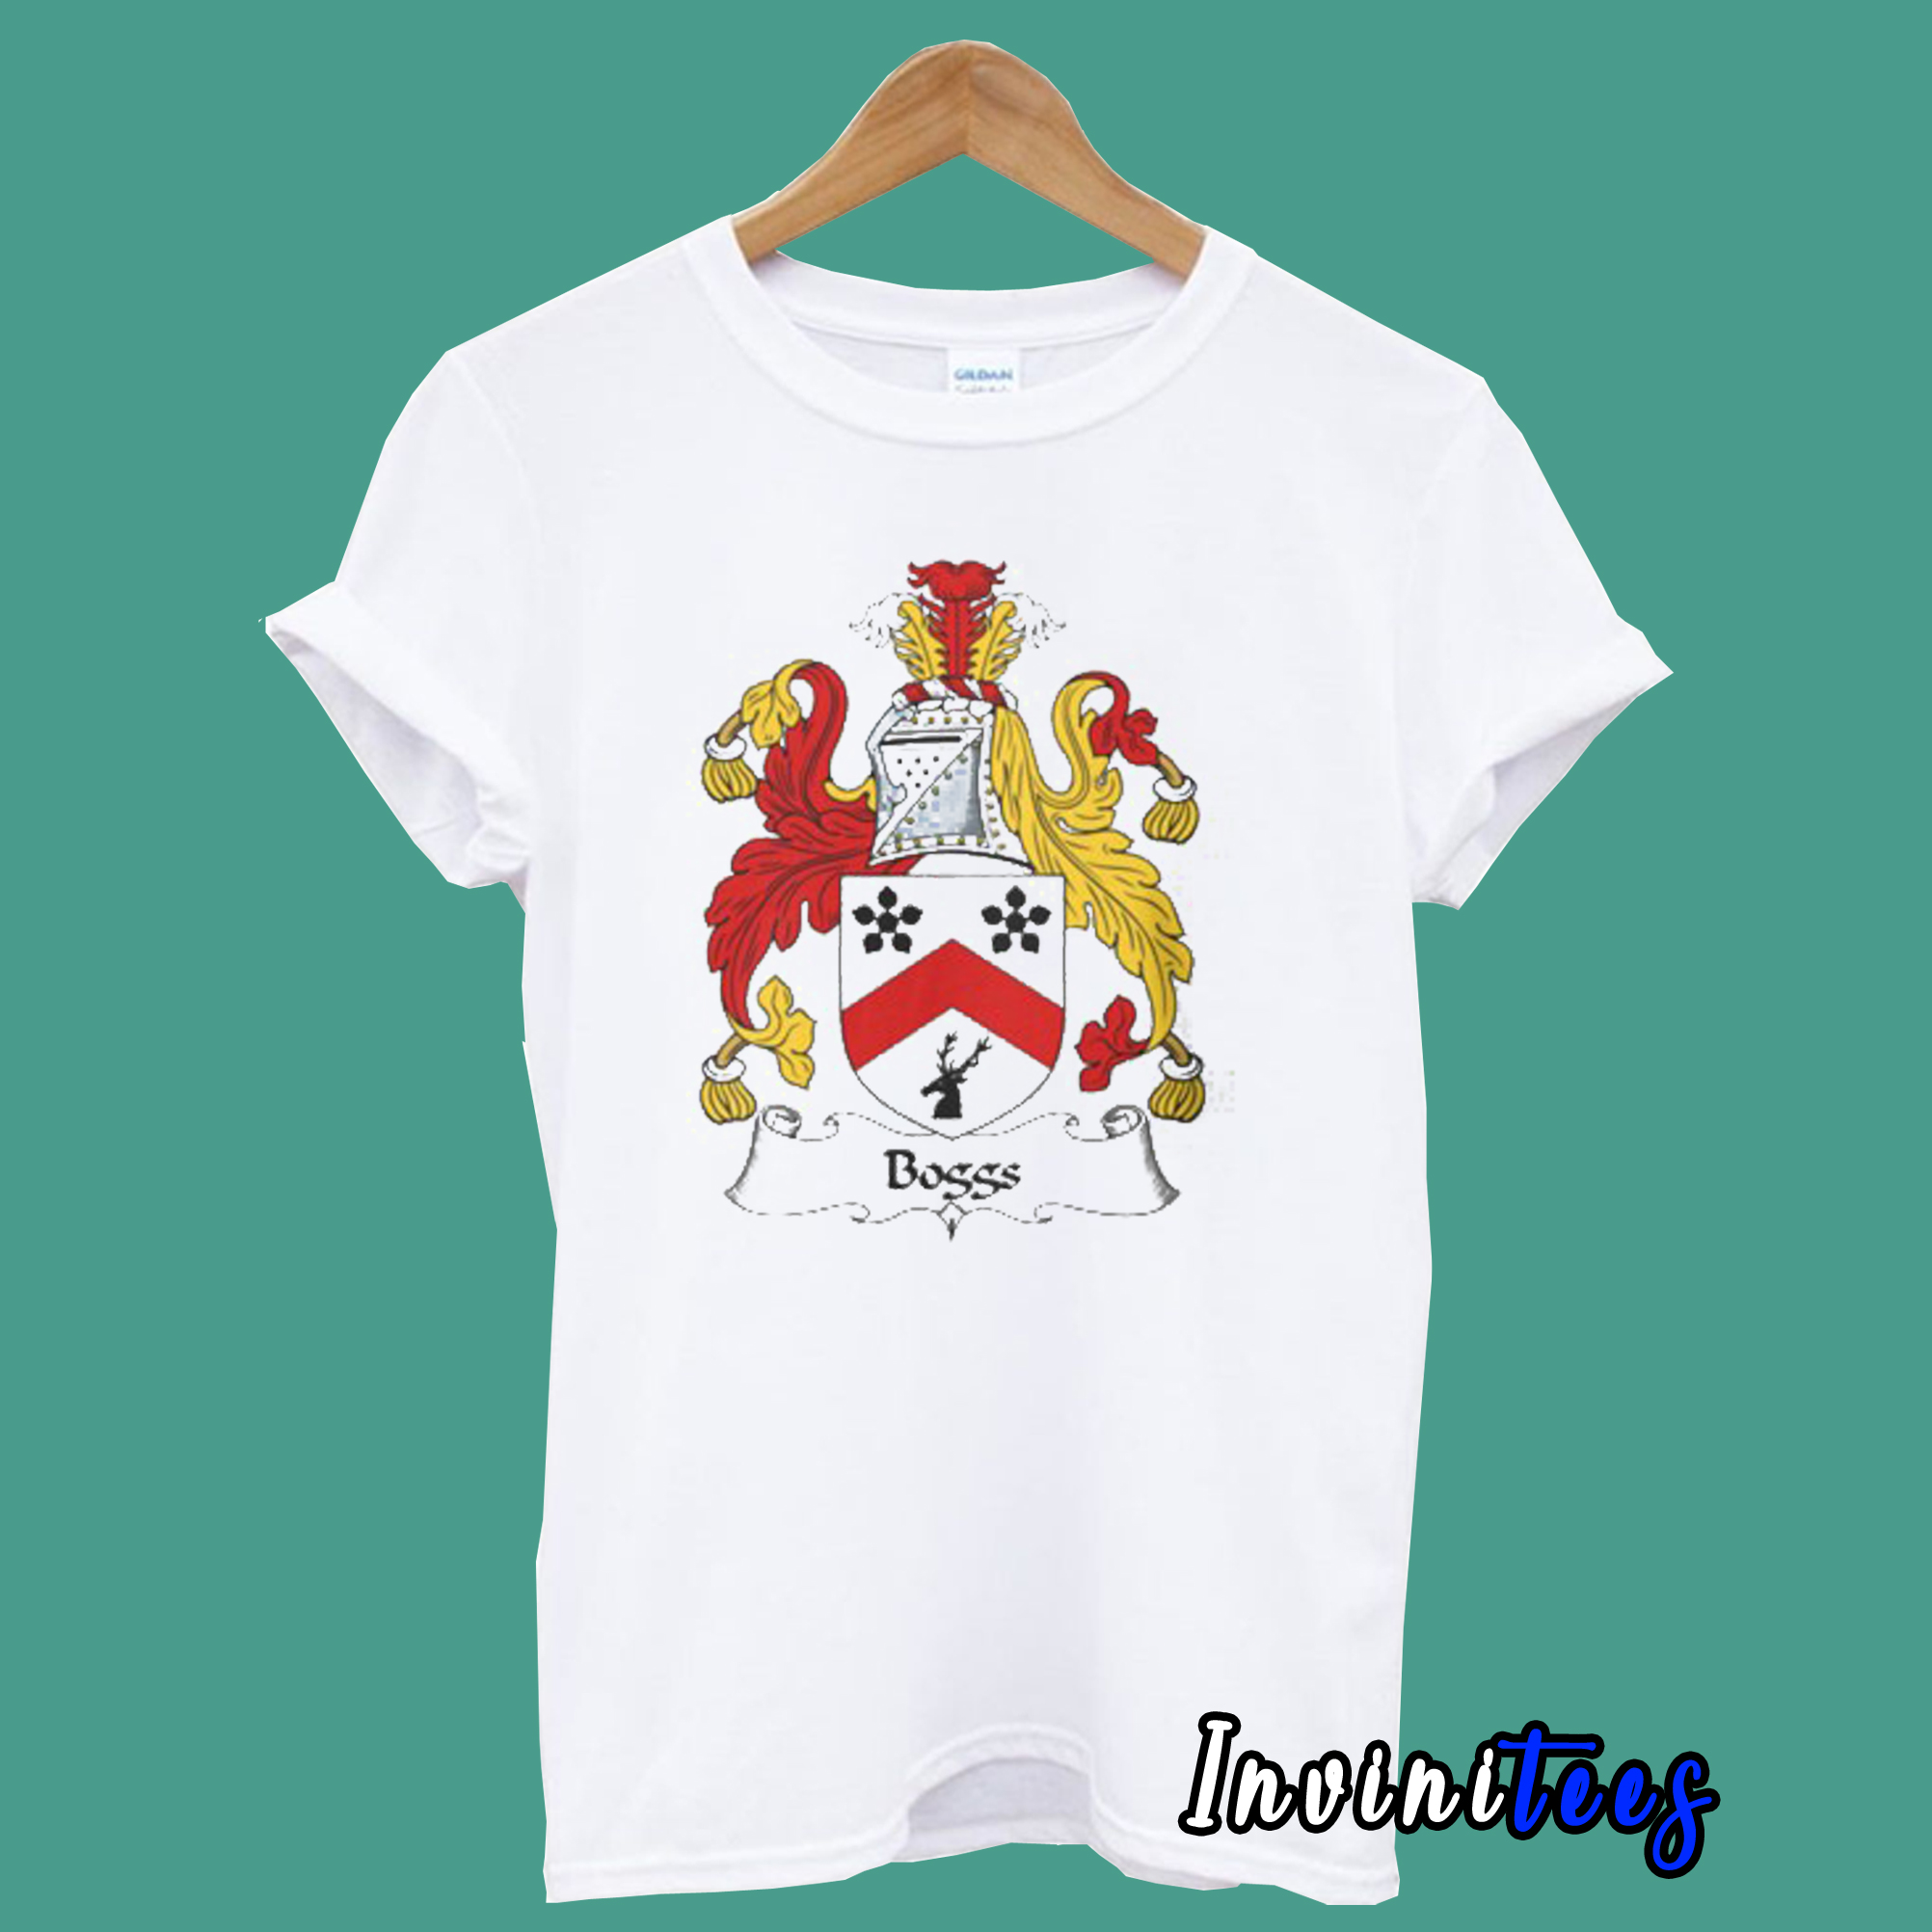 Boggs Coat of Arms or Family T shirt